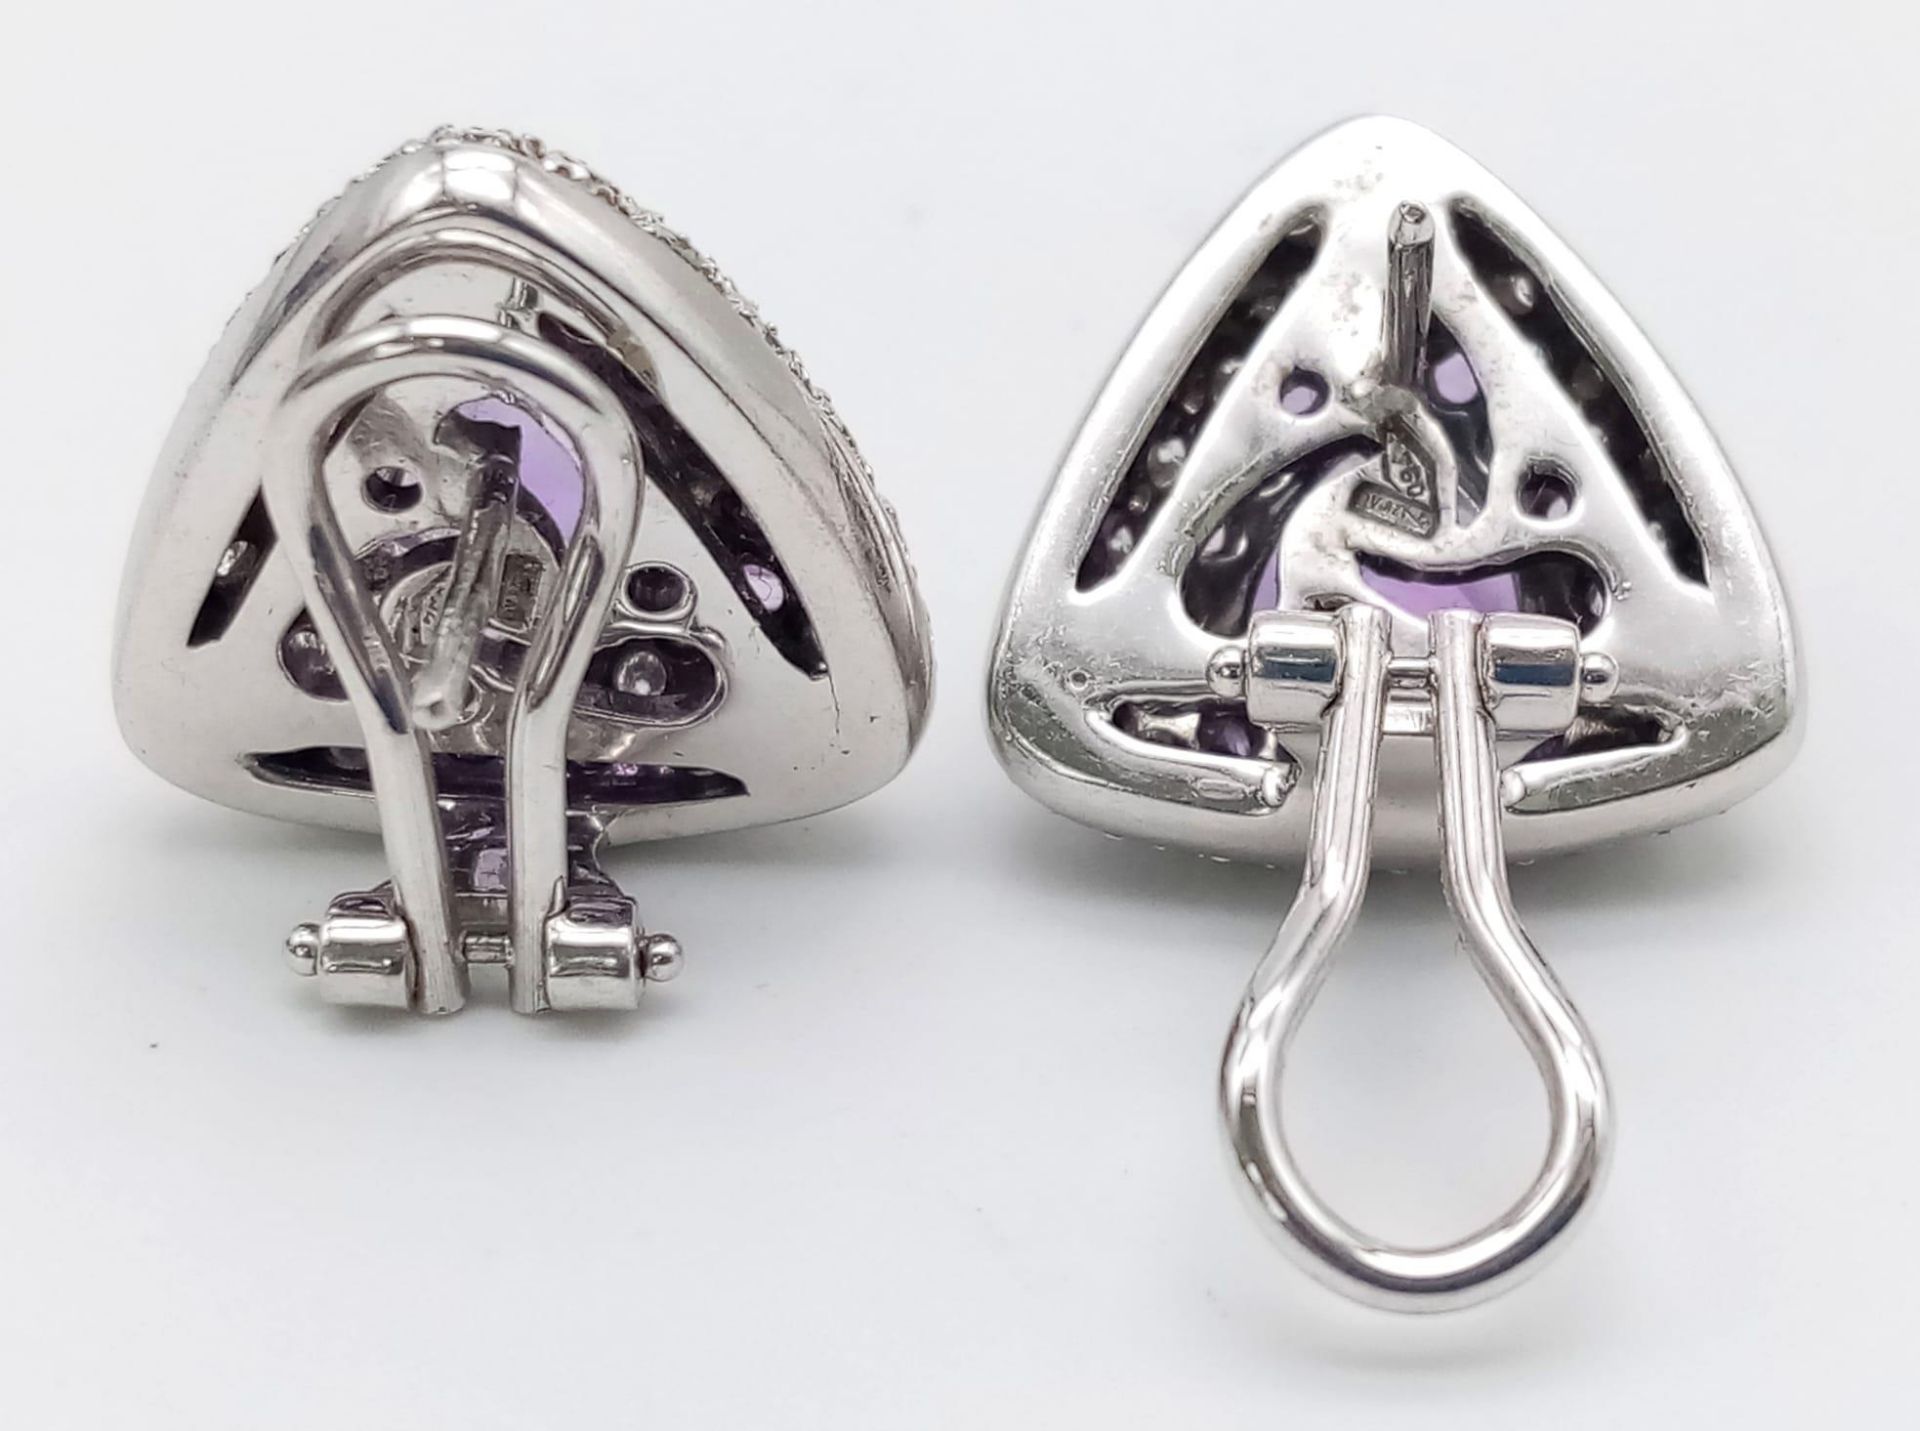 A FABULOUS 18K WHITE GOLD DIAMOND AND AMETHYST RING WITH MATCHING EARRINGS . 35.5gms - Image 10 of 12